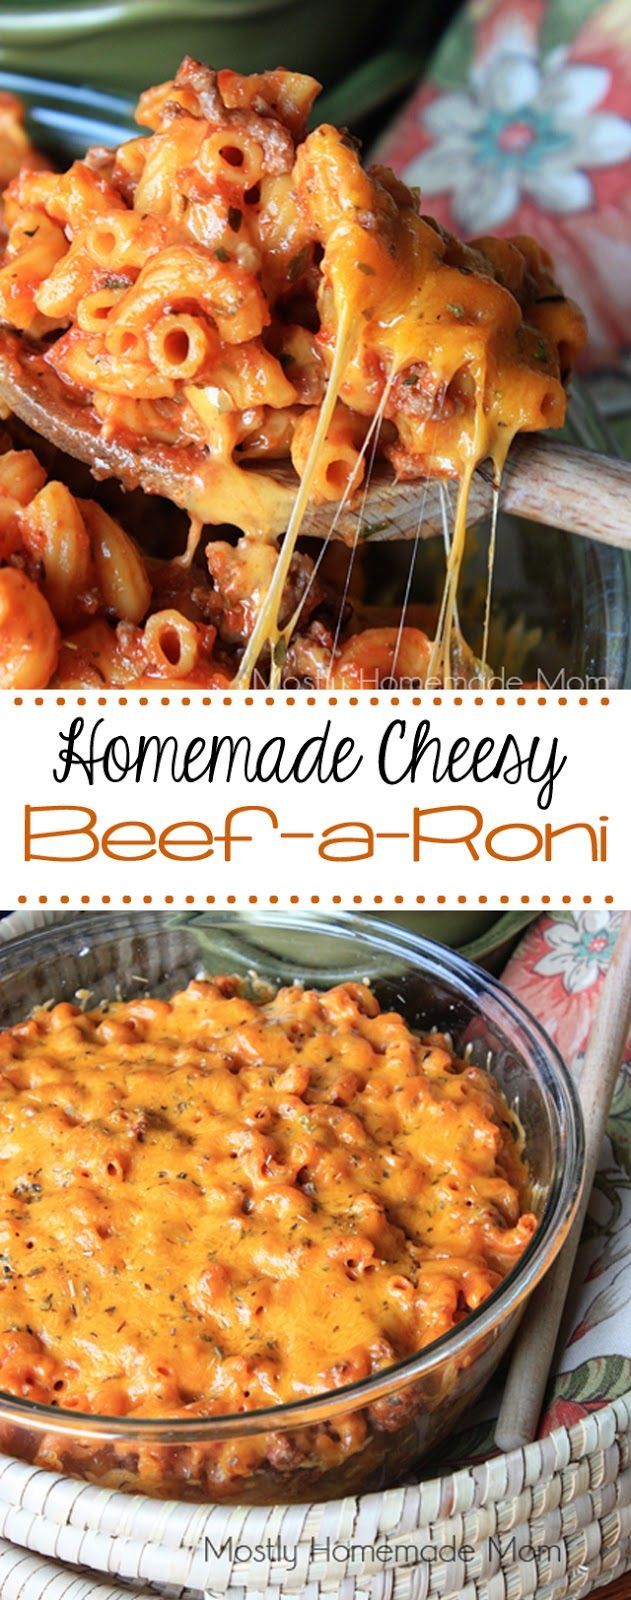 Homemade Cheesy Beefaroni – an amazing tomato meat sauce combined with elbow macaroni noodles and layers of gooey cheddar cheese –